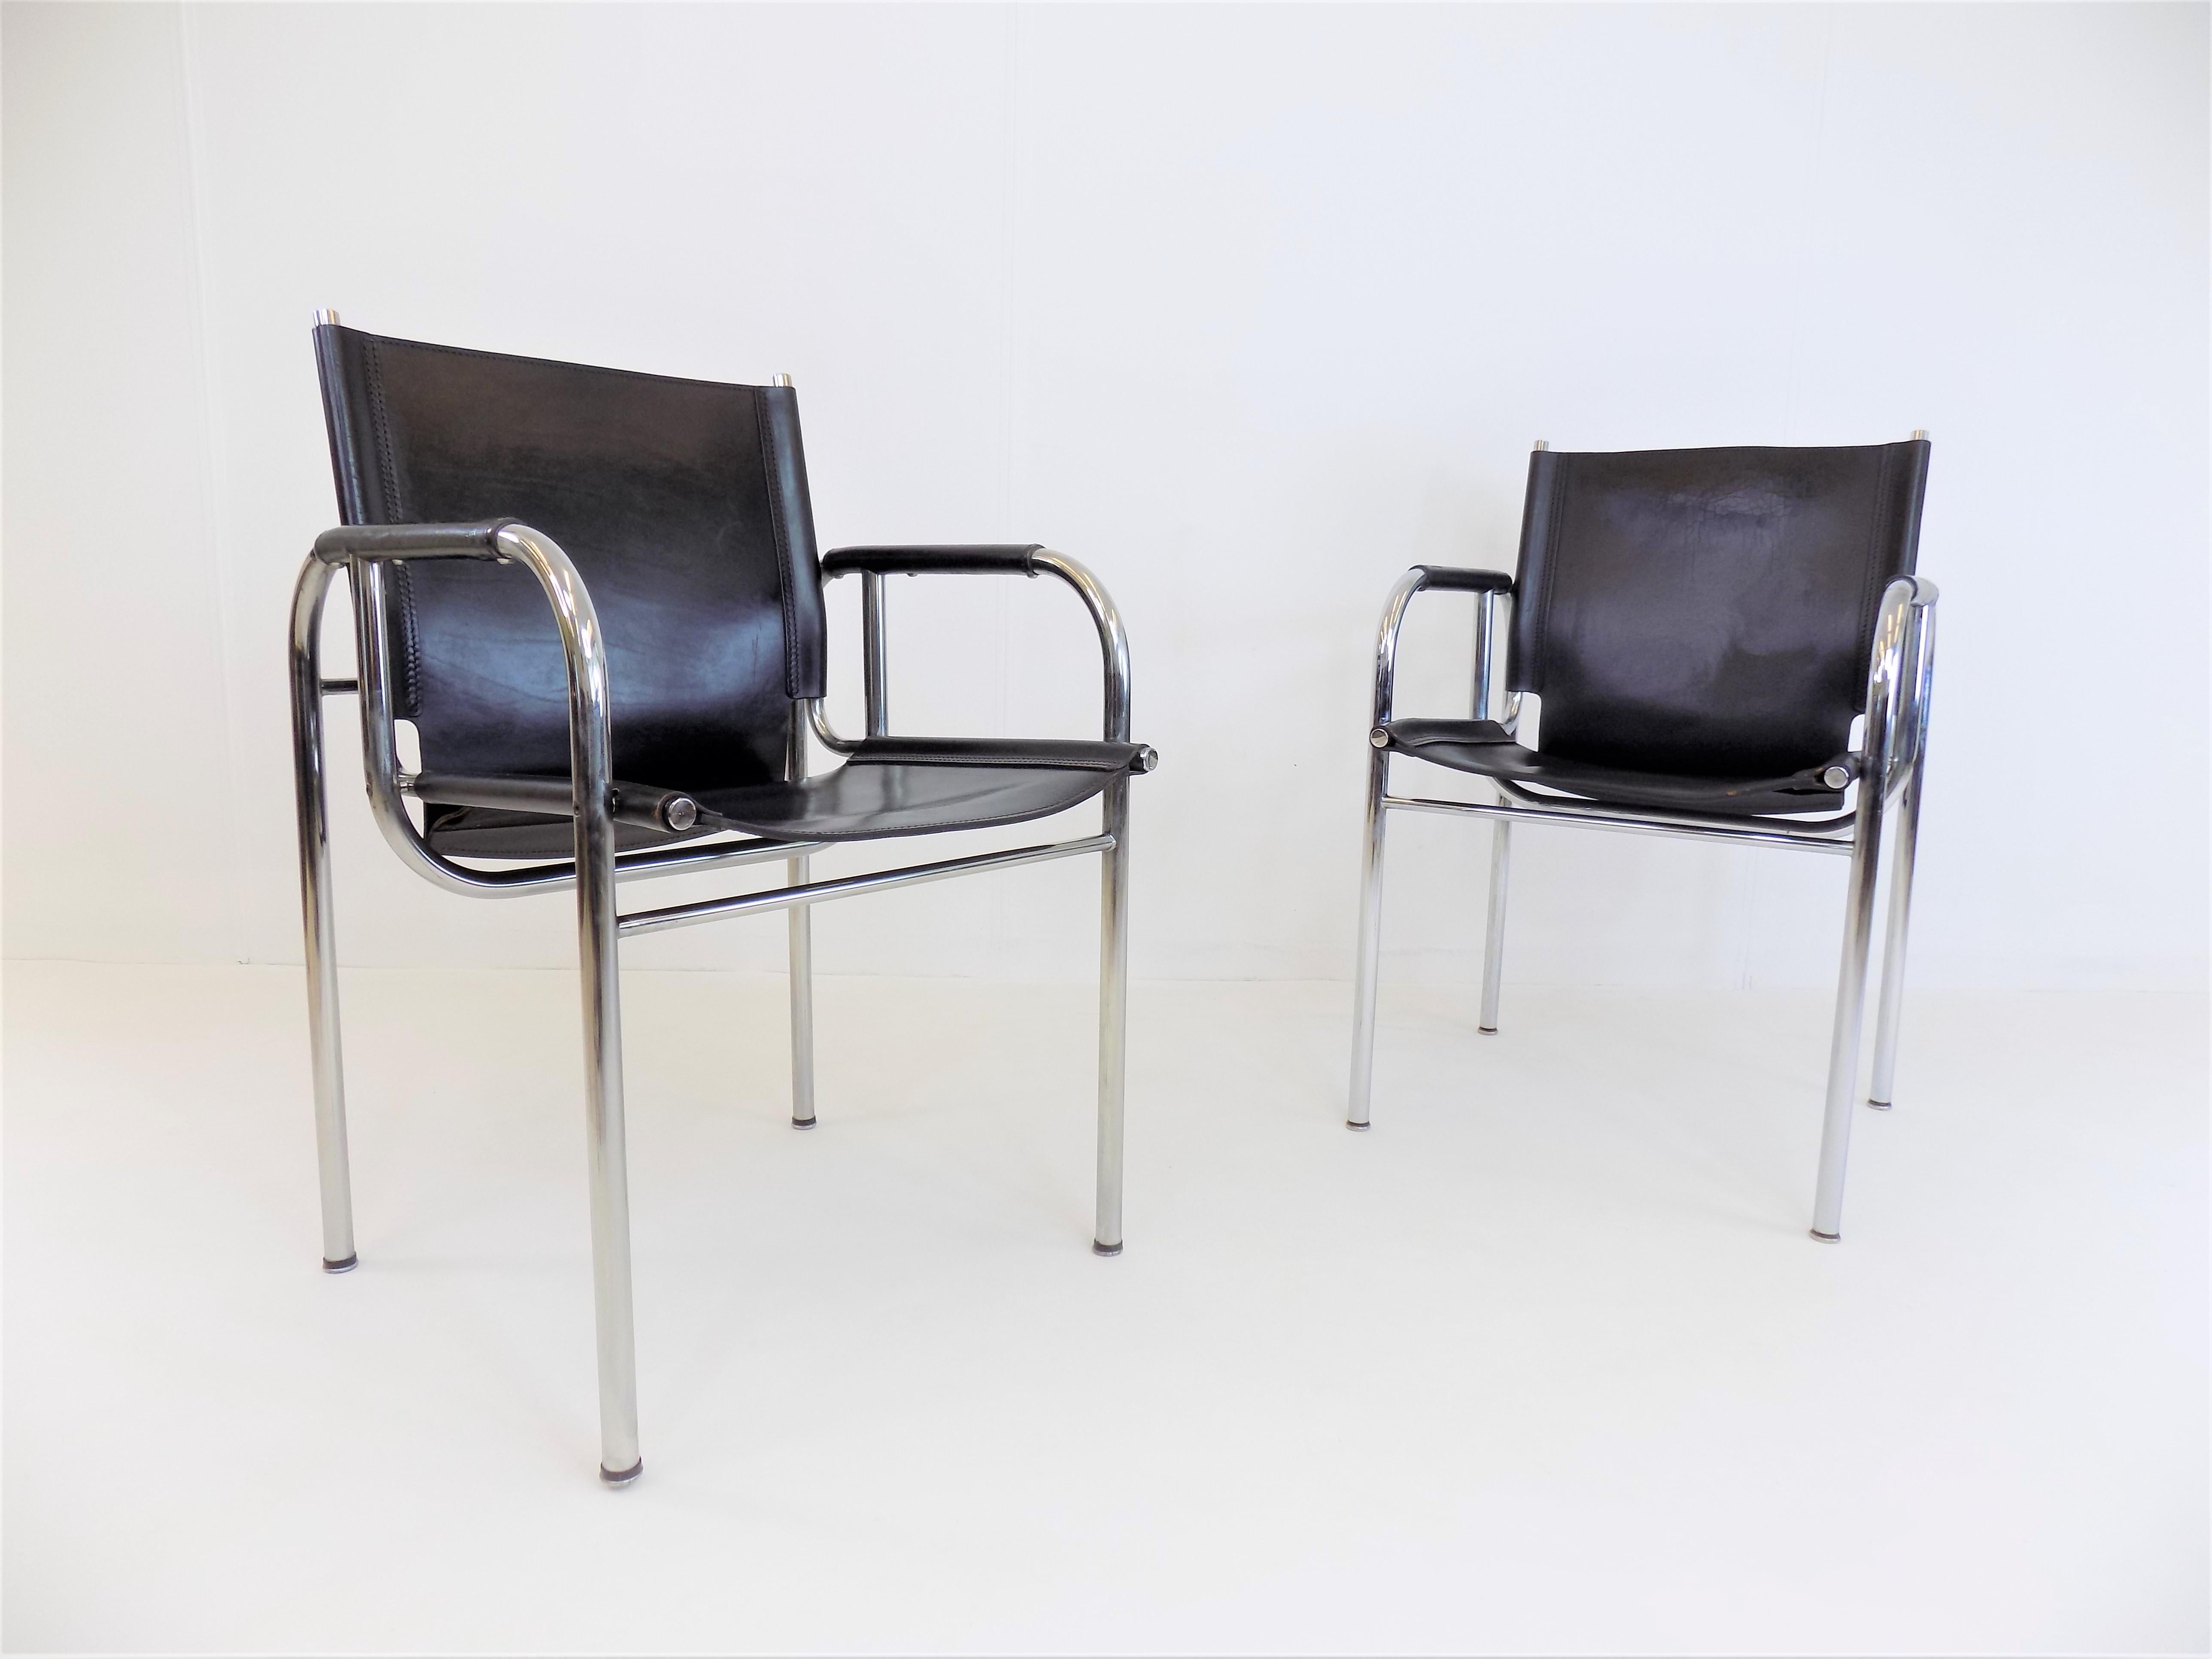 First class Strässle leather lounge chair from the 1960s. The lounge chairs, in a deep black leather tone, come in very good condition. The leather shows minimal signs of wear, Patina on the backrest of a chair. The chrome frames are in excellent